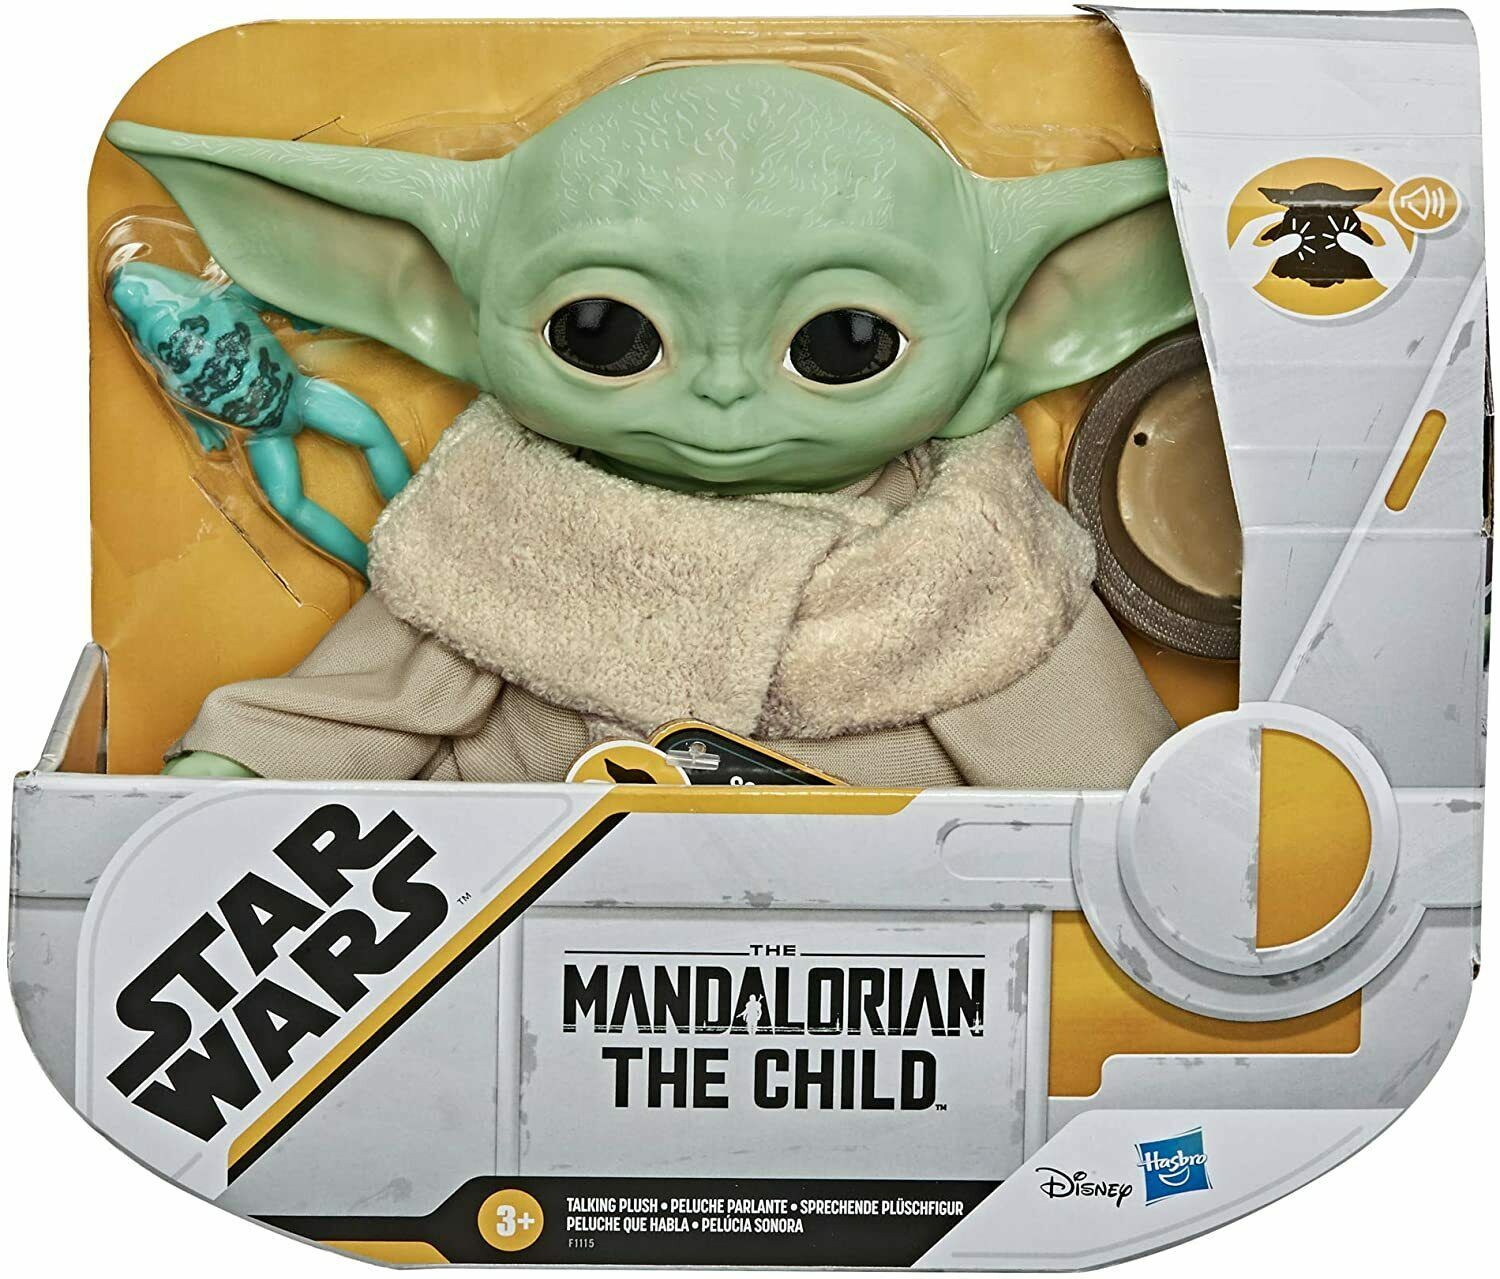 Primary image for Star Wars The Mandalorian THE CHILD Talking Plush 7.5" Brand New